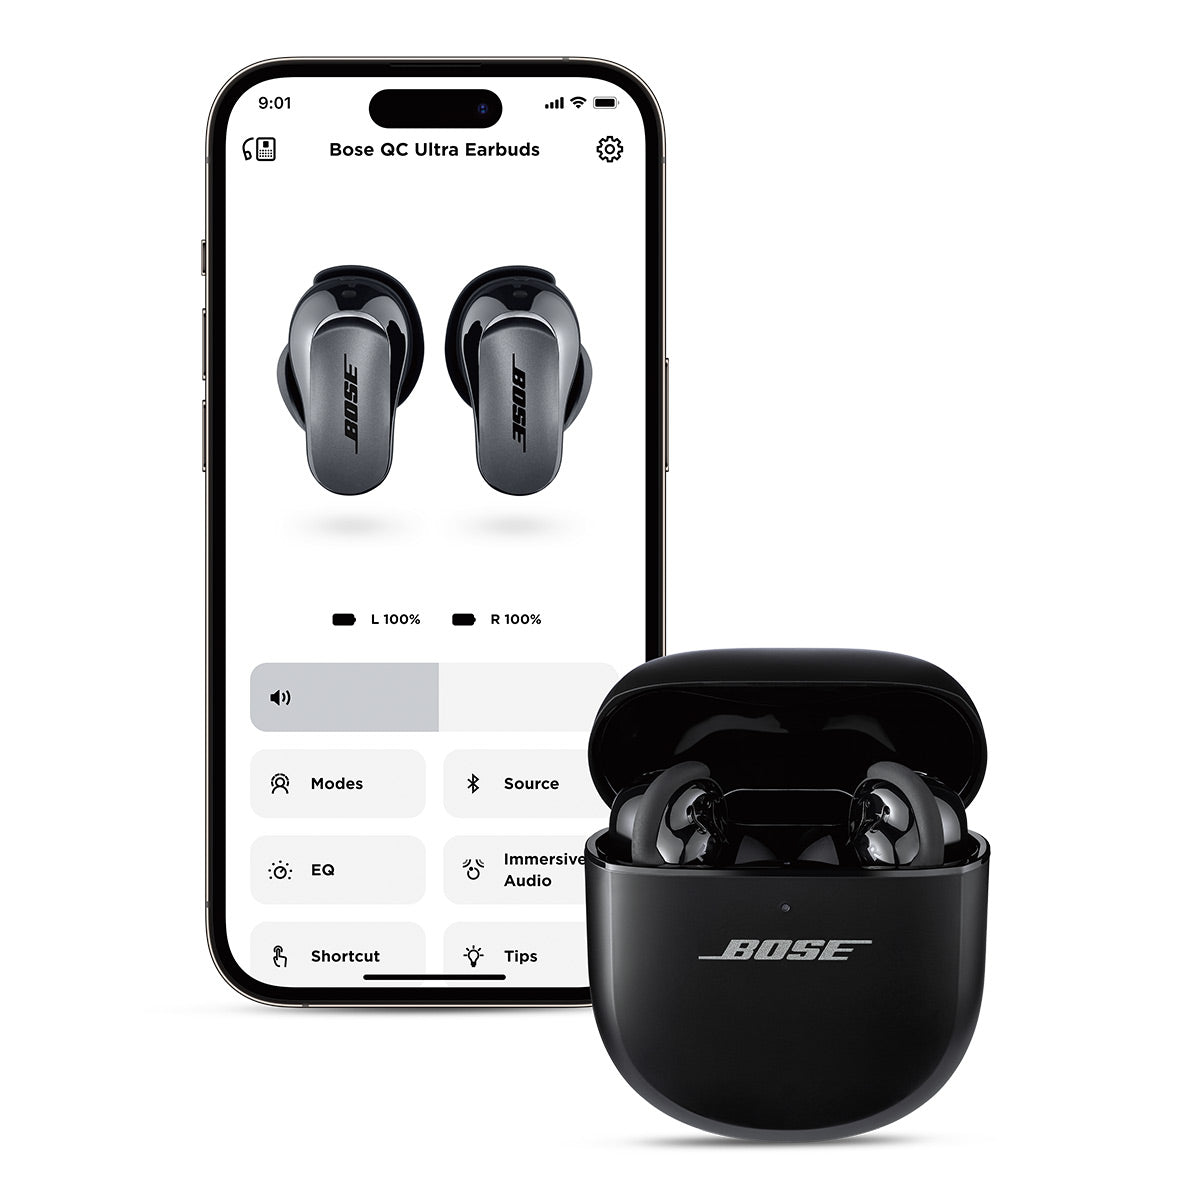 Bose QuietComfort Ultra Wireless Noise Cancelling Earbuds (Black)